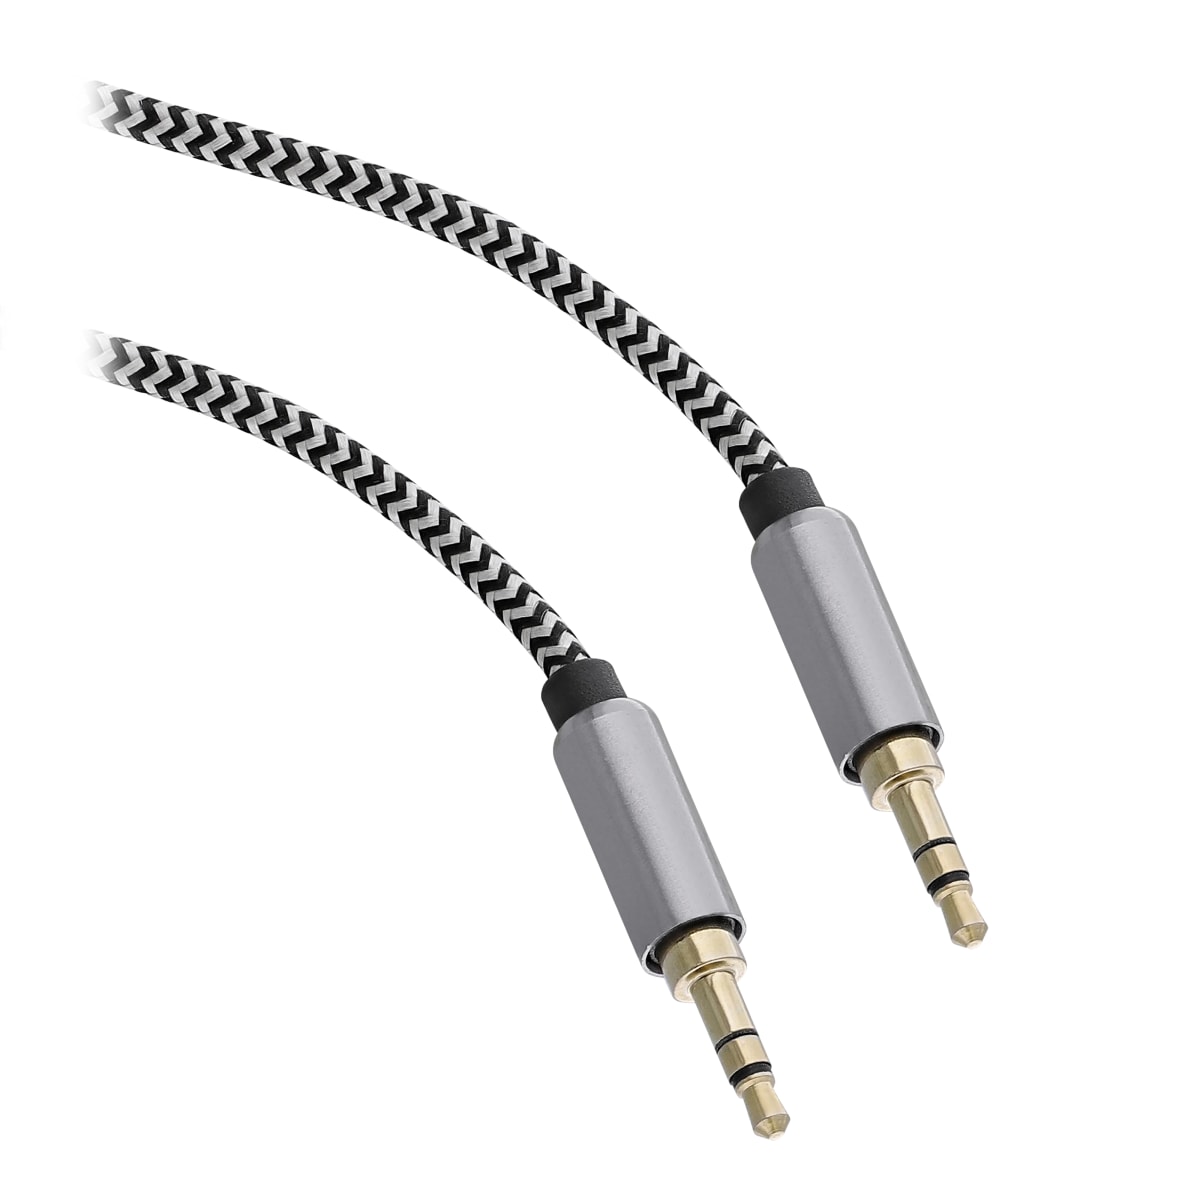 Jack 3,5mm male / jack 3,5mm male cable 1m